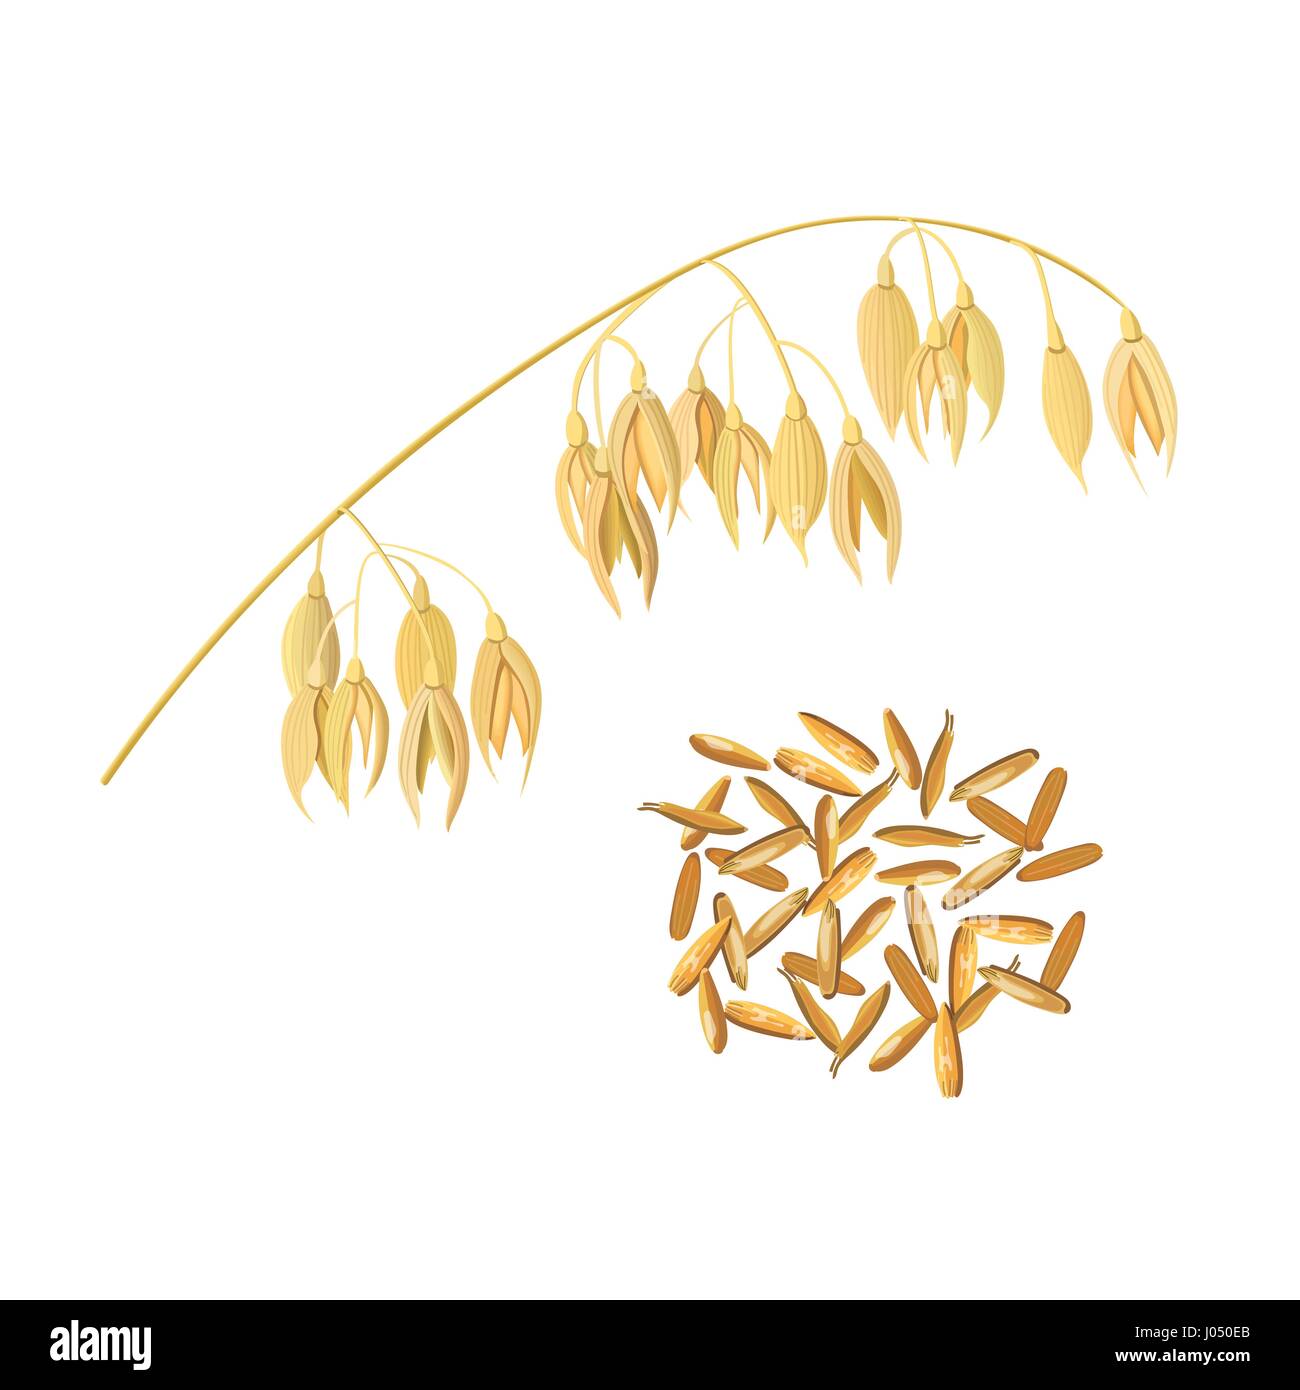 Oat ears of grain and bran isolated on white background. Golden spike. Side view. Close up. Vector illustration. For cooking, food design, cosmetics,  Stock Vector